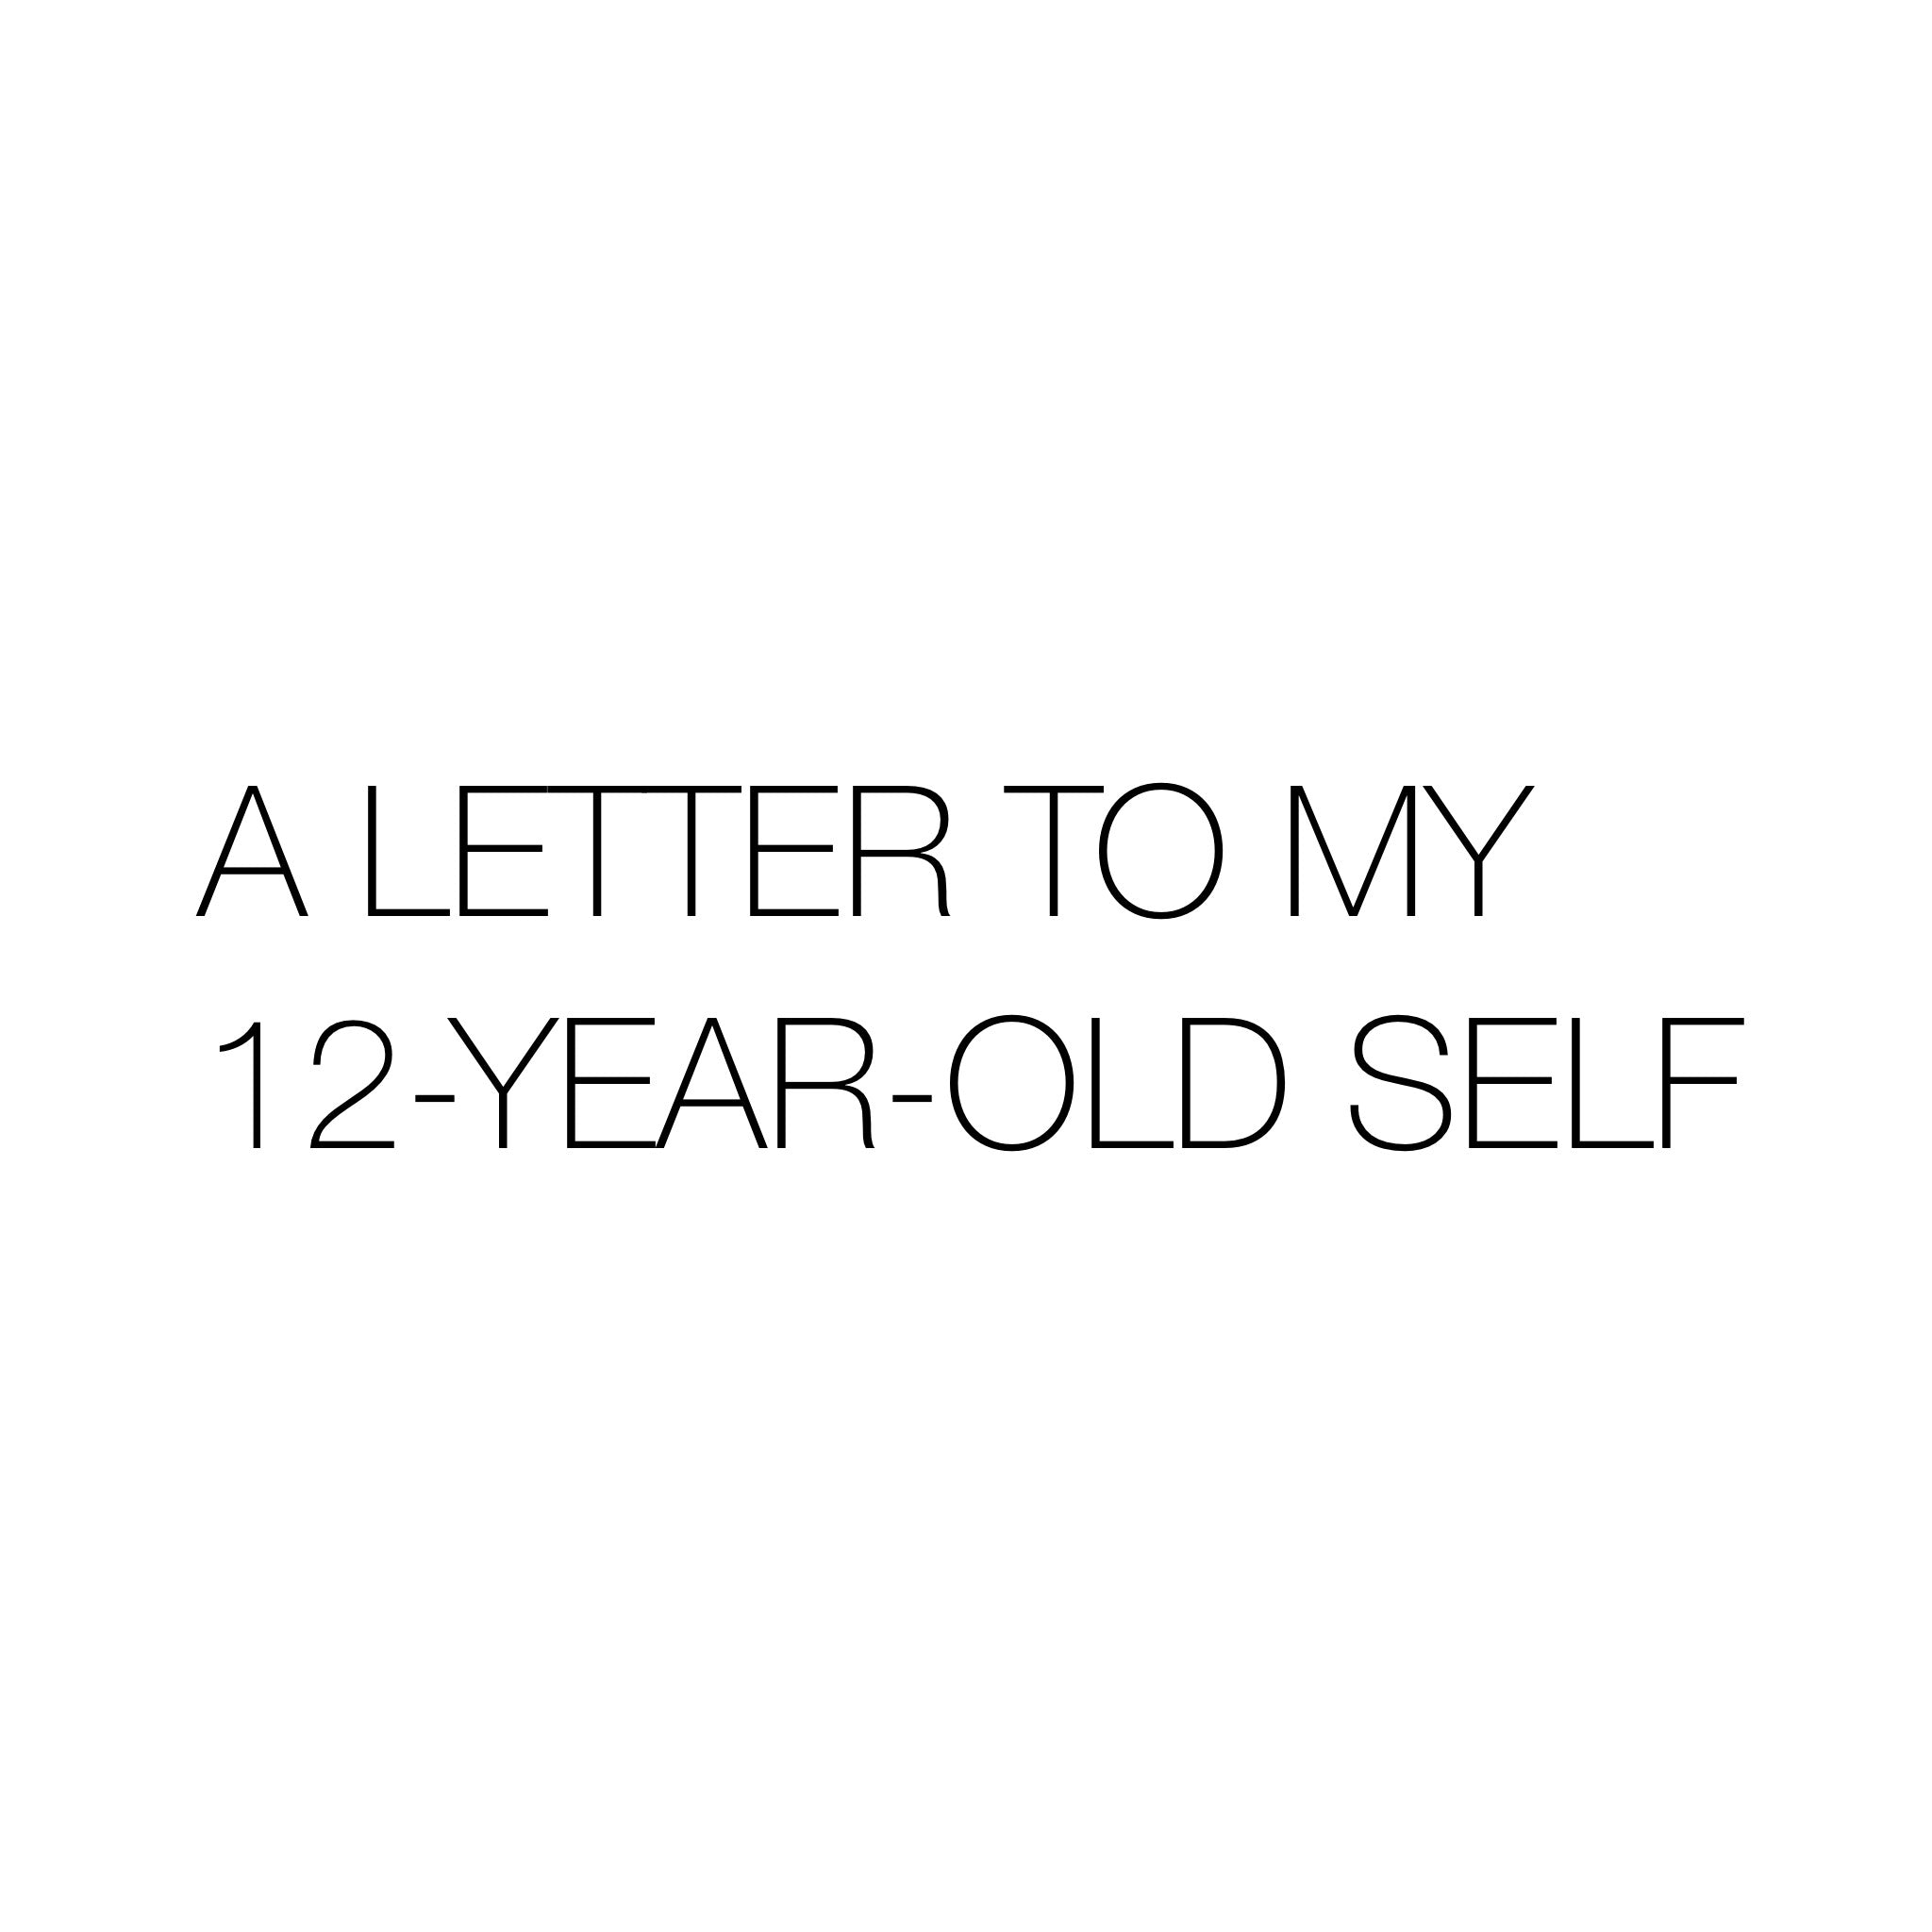 A LETTER TO MY 12-YEAR-OLD SELF BY MARK LEMON